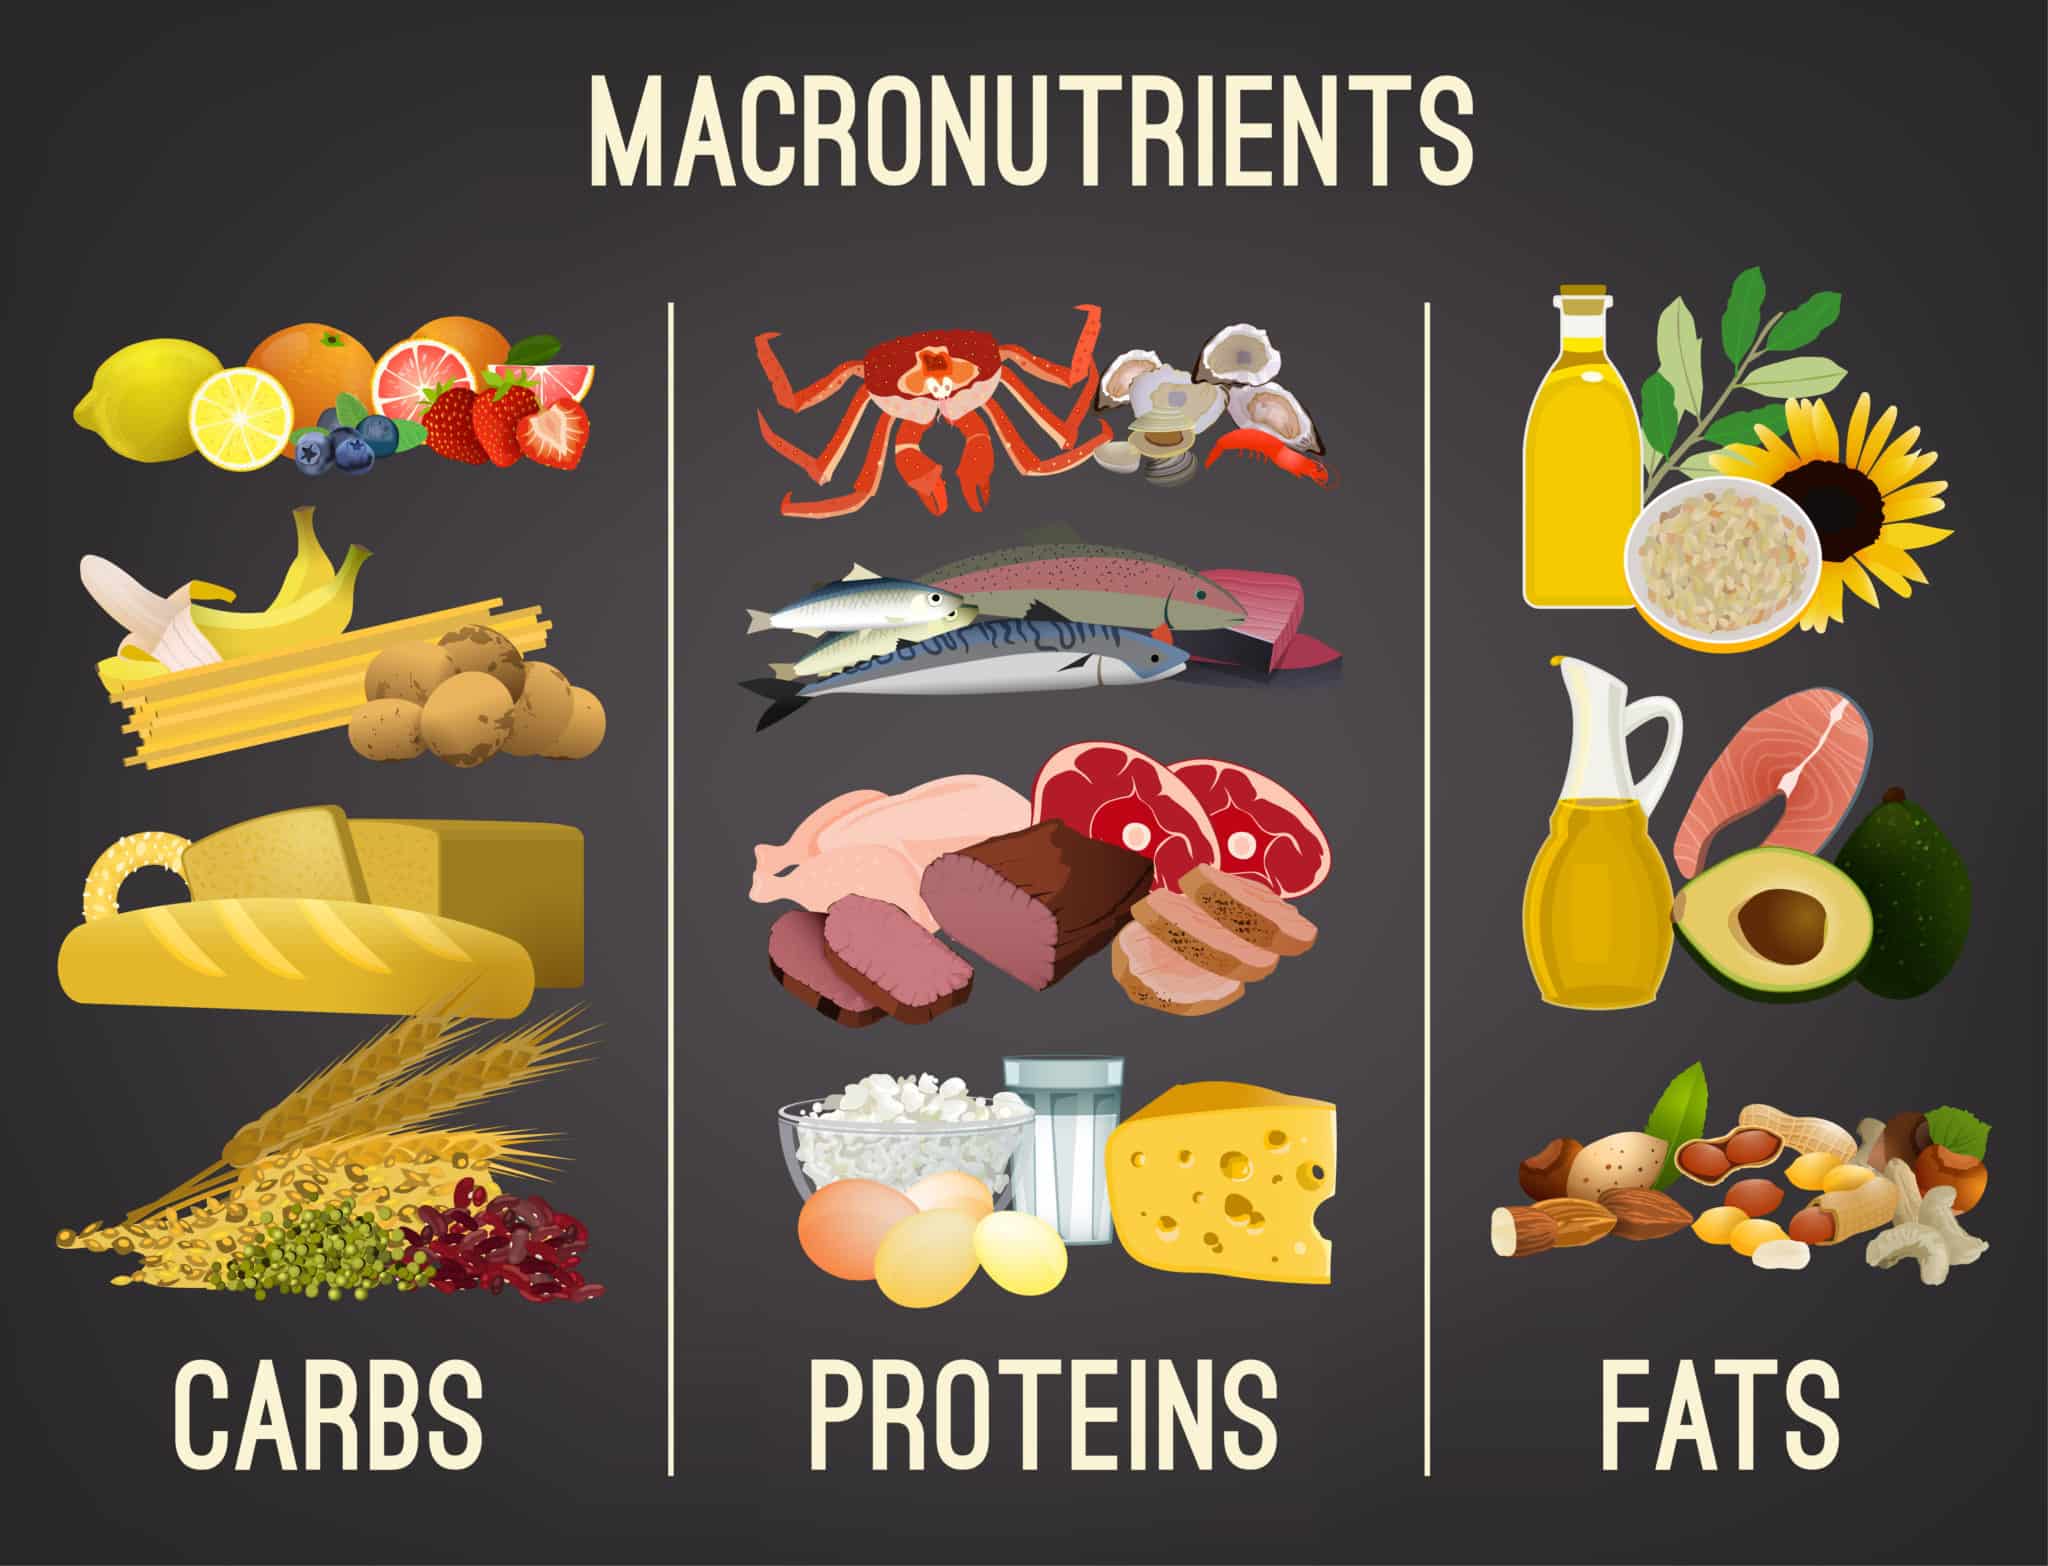 Graphic of macronutrients with images of carbs, proteins and fats